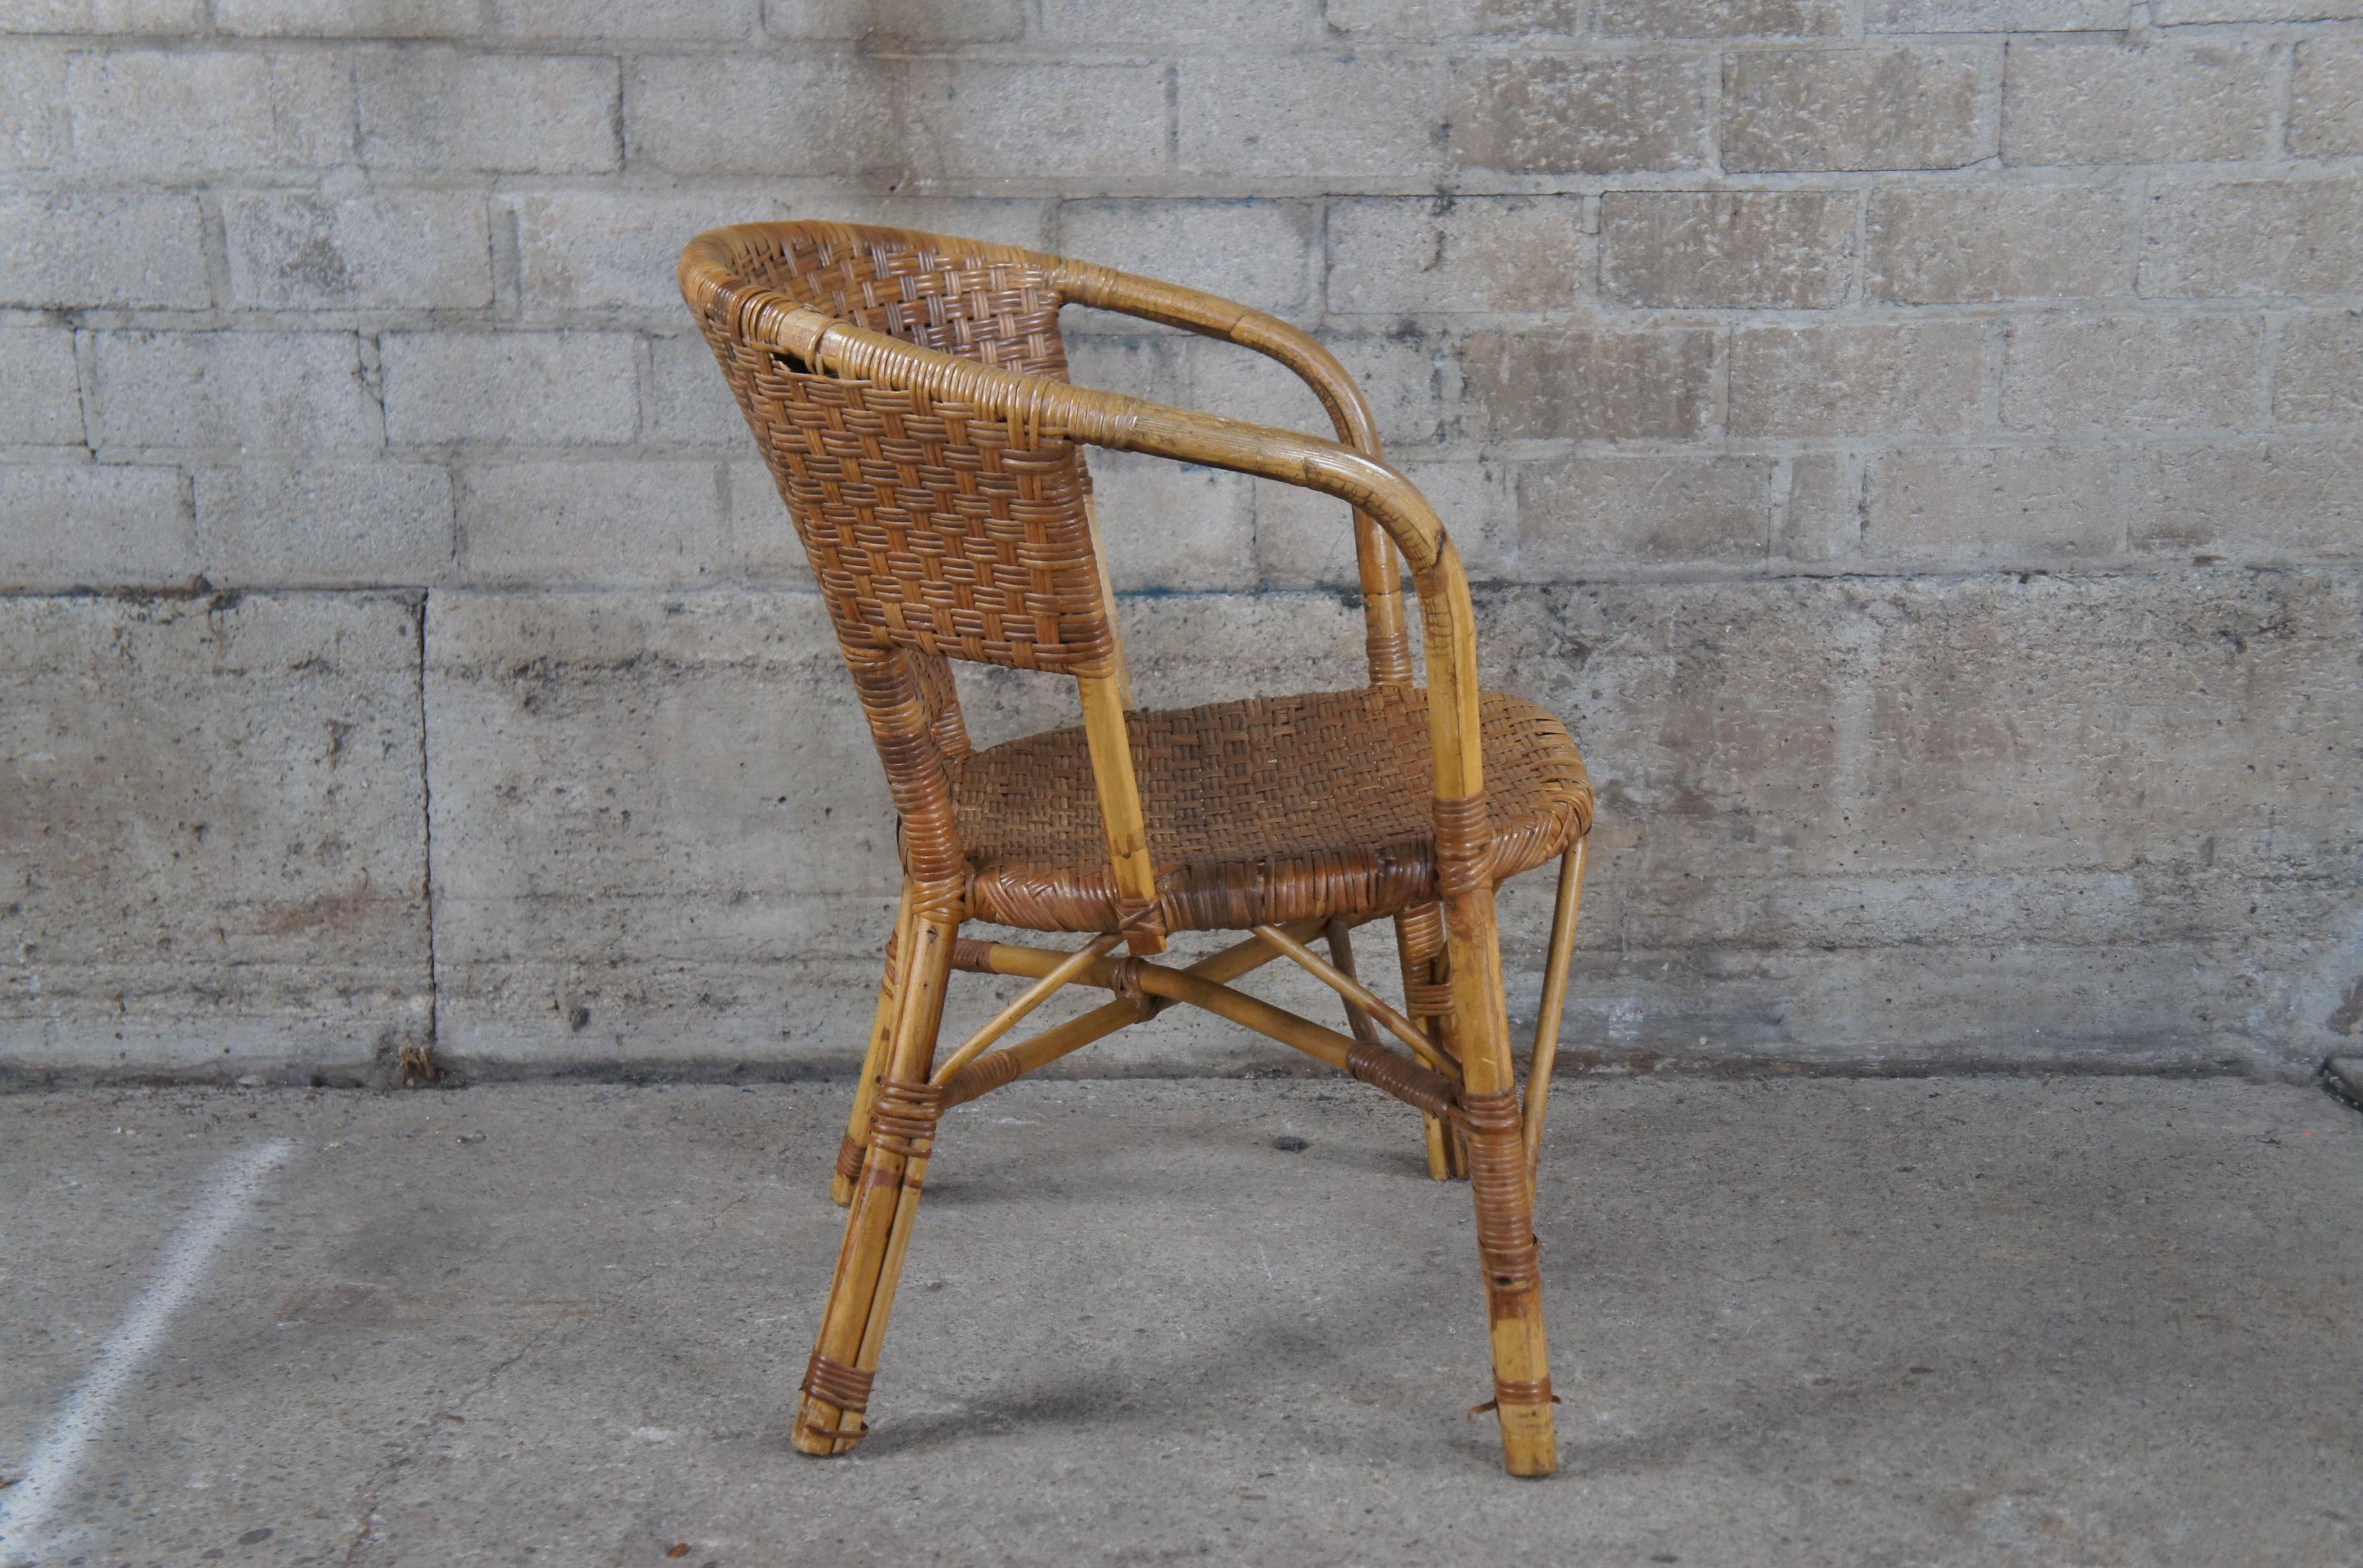 20th Century Antique Bentwood Bamboo Woven Wicker Rattan Arm Chair Boho Boheimian For Sale